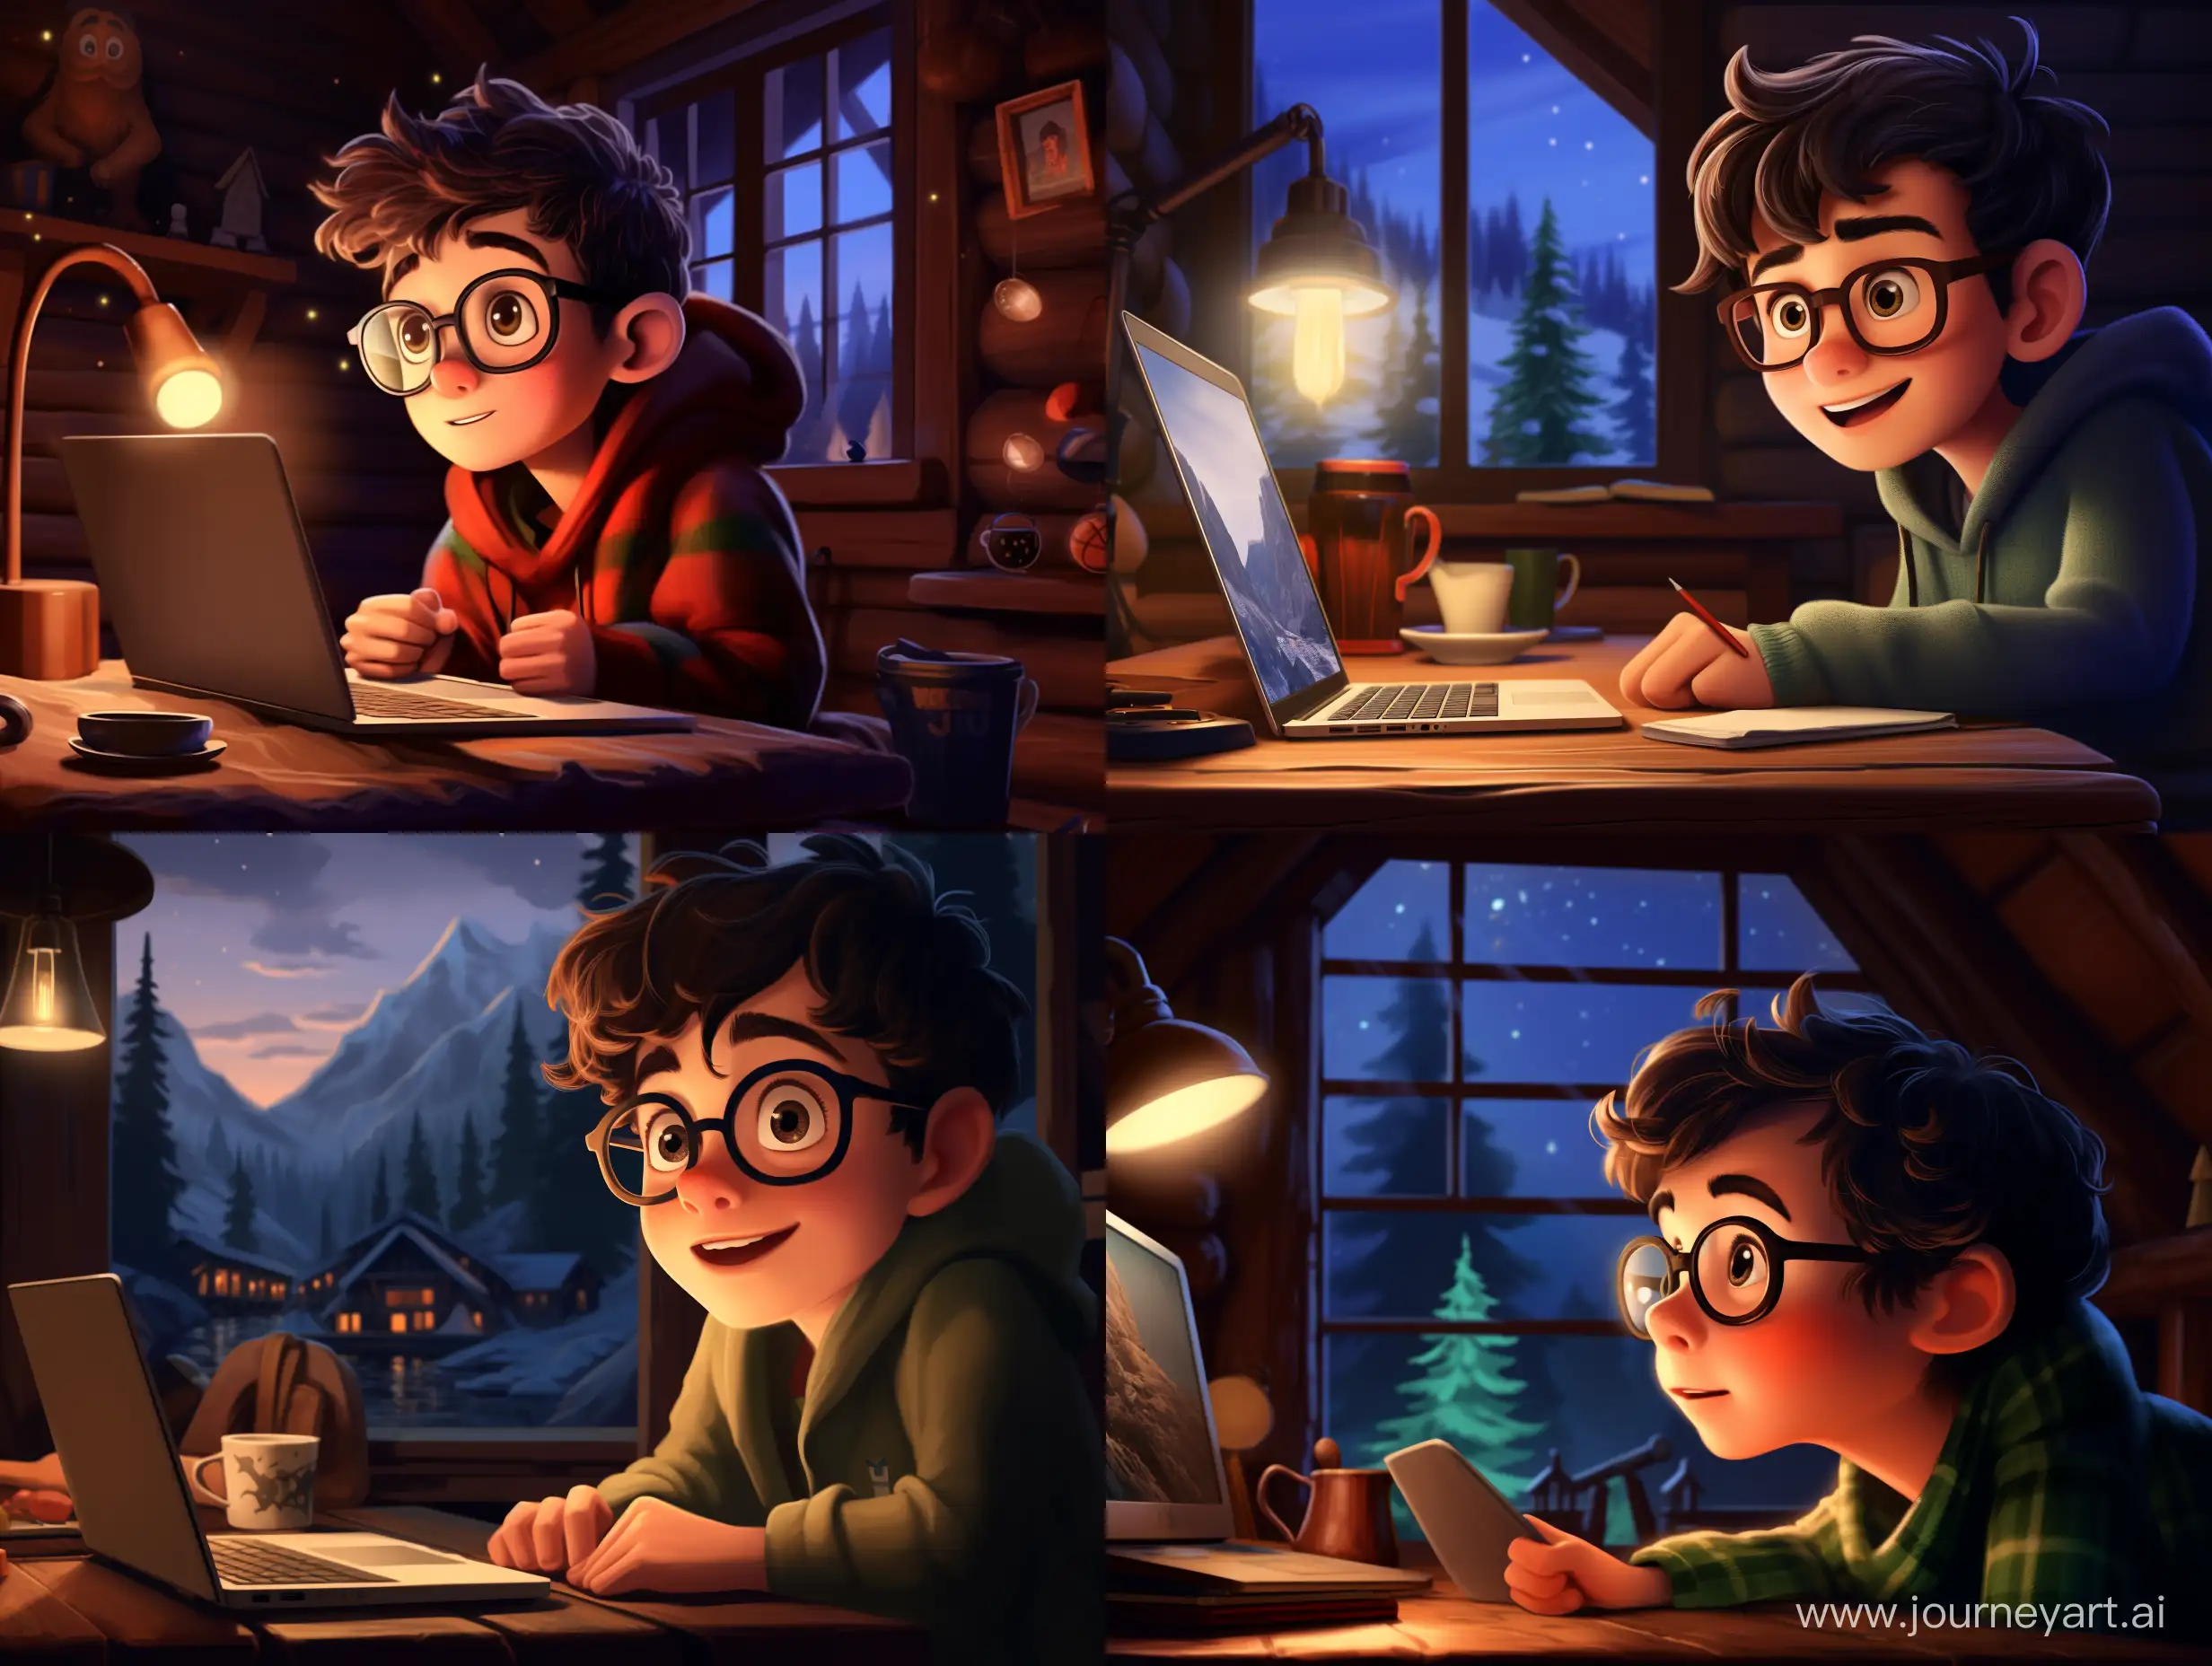 Surprised-Boy-in-Cozy-Cabin-with-Laptop-Pixar-Style